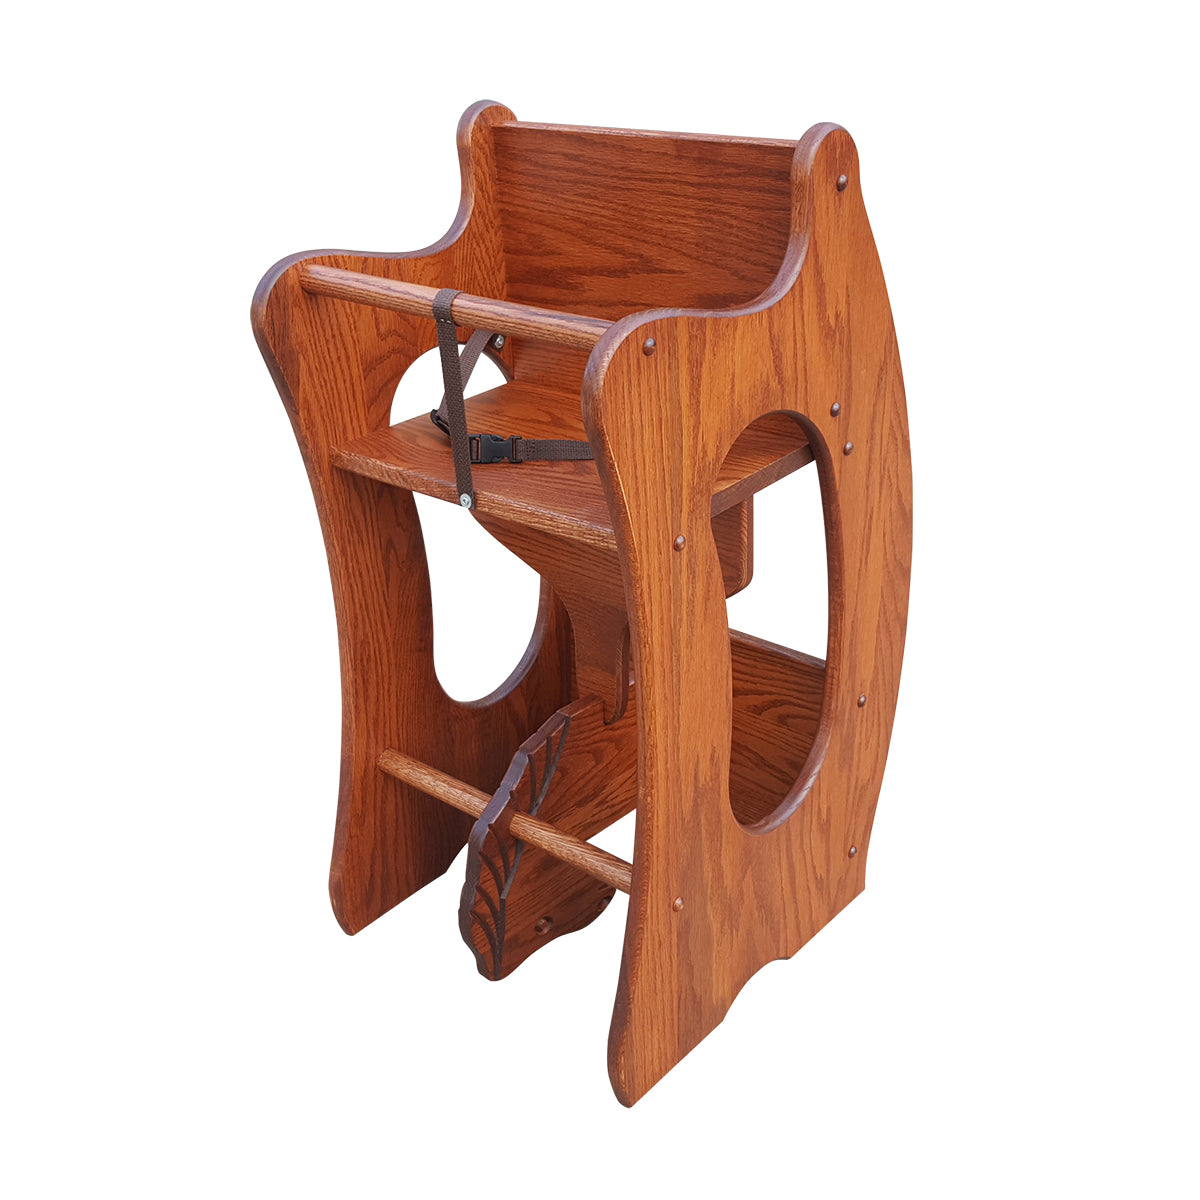 3-in-1 Children's High Chair, Wooden Rocking Horse, Writing Desk-Peaceful Classics